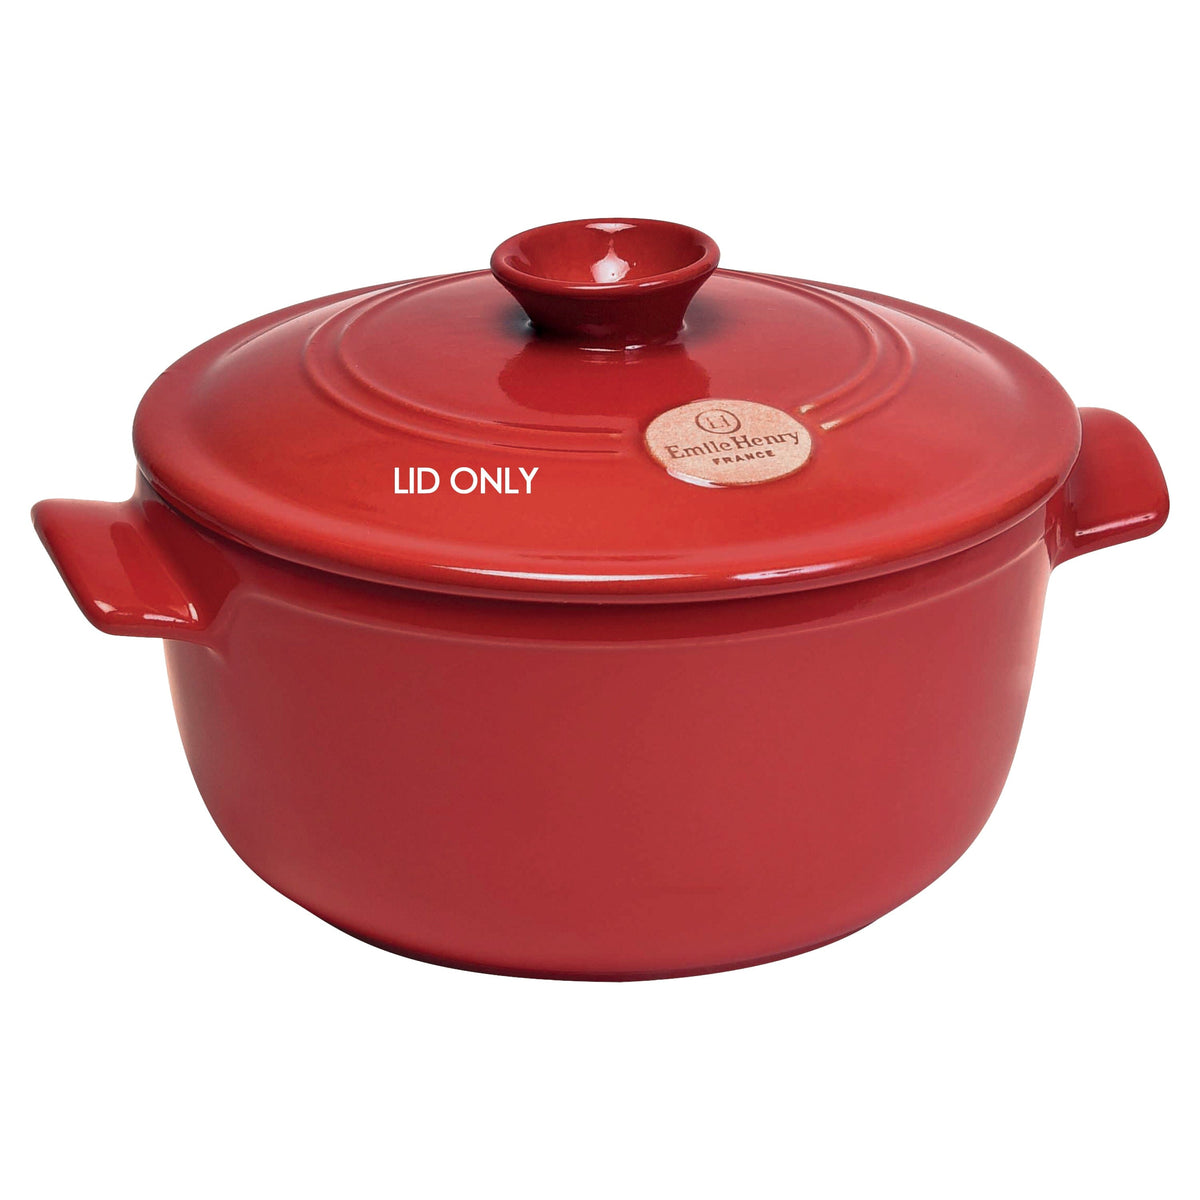 Replacement for this broken Emile Henry Dutch oven bakeware 10